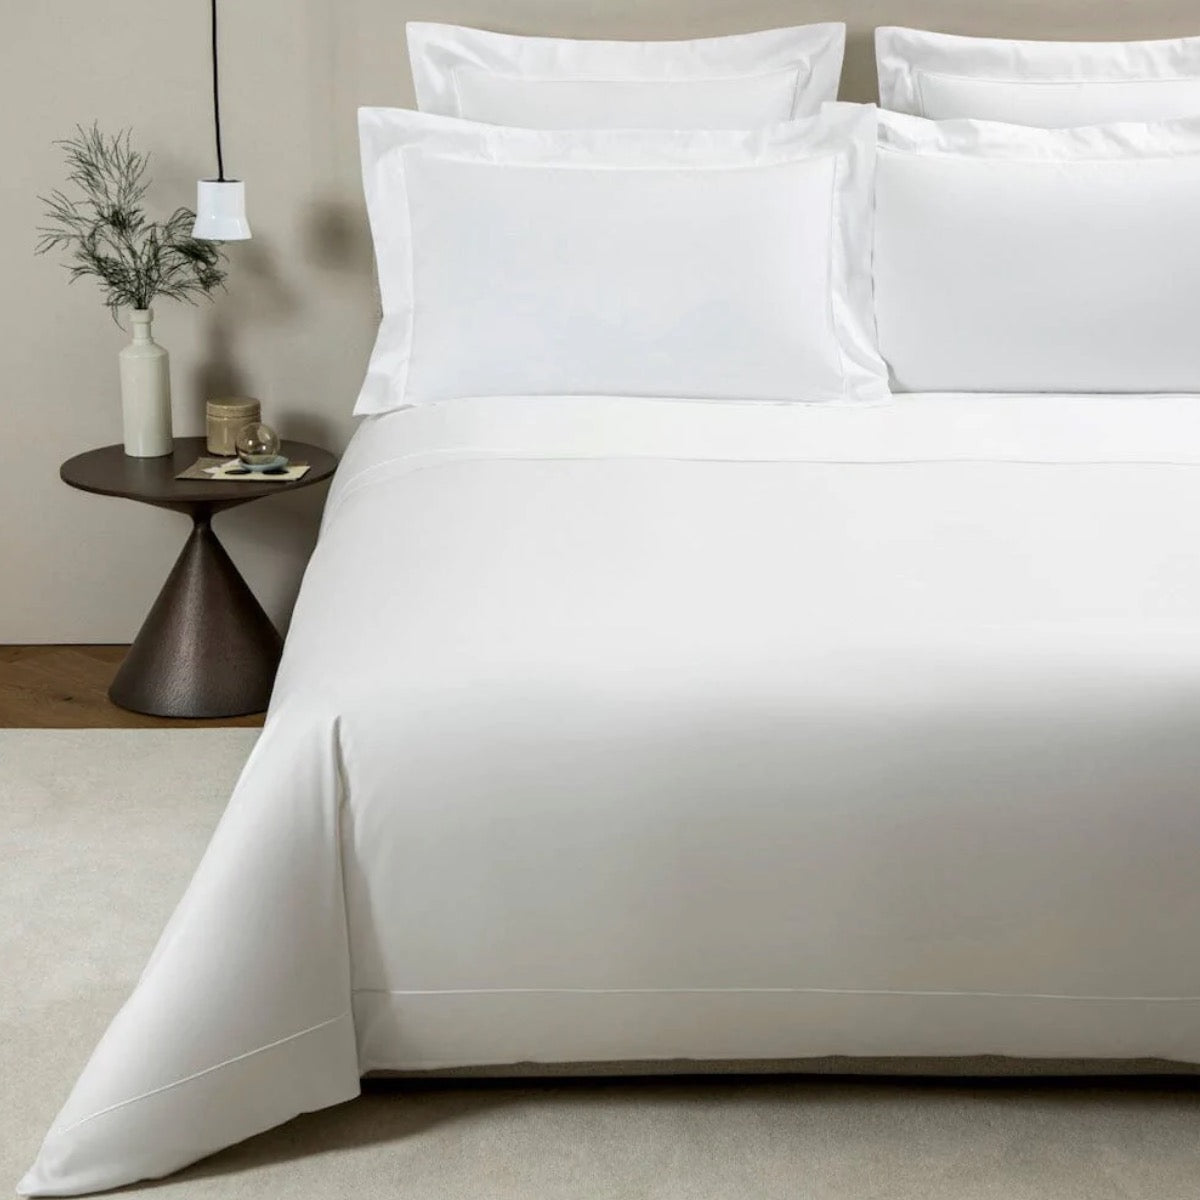 Buyer's Guide for Luxury Sheets: Matouk, Sferra, and Frette